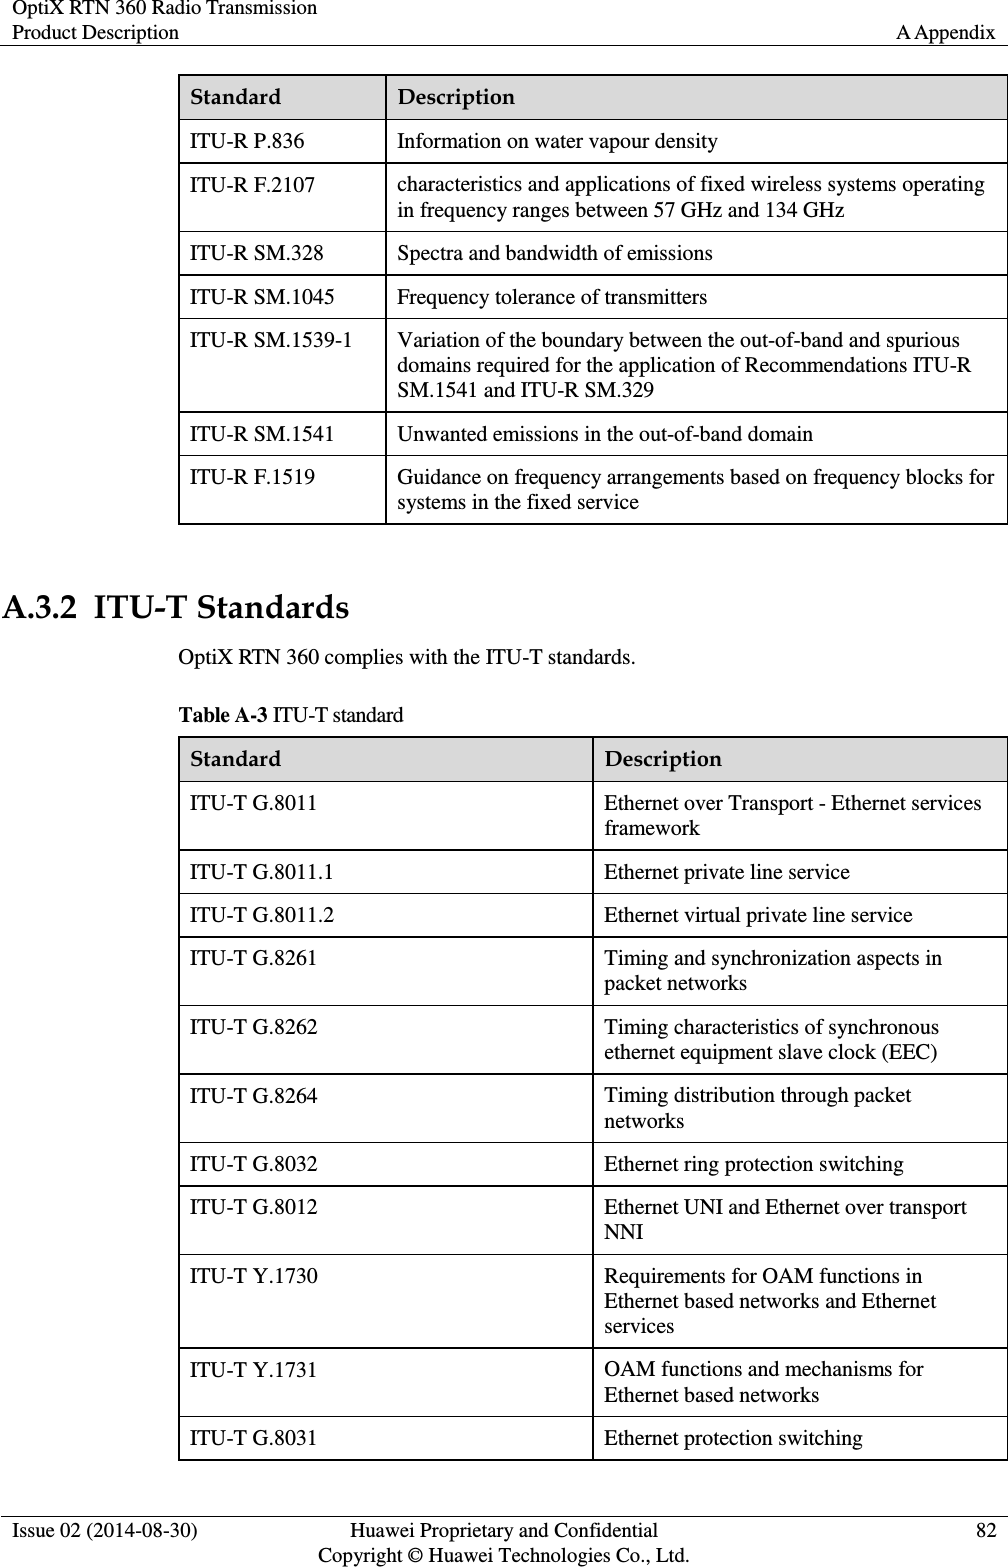 OptiX RTN 360 Radio Transmission Product Description A Appendix  Issue 02 (2014-08-30) Huawei Proprietary and Confidential                                     Copyright © Huawei Technologies Co., Ltd. 82  Standard Description ITU-R P.836 Information on water vapour density   ITU-R F.2107 characteristics and applications of fixed wireless systems operating in frequency ranges between 57 GHz and 134 GHz ITU-R SM.328 Spectra and bandwidth of emissions   ITU-R SM.1045 Frequency tolerance of transmitters ITU-R SM.1539-1 Variation of the boundary between the out-of-band and spurious domains required for the application of Recommendations ITU-R SM.1541 and ITU-R SM.329 ITU-R SM.1541 Unwanted emissions in the out-of-band domain ITU-R F.1519 Guidance on frequency arrangements based on frequency blocks for systems in the fixed service  A.3.2  ITU-T Standards OptiX RTN 360 complies with the ITU-T standards. Table A-3 ITU-T standard Standard Description ITU-T G.8011 Ethernet over Transport - Ethernet services framework ITU-T G.8011.1 Ethernet private line service ITU-T G.8011.2 Ethernet virtual private line service ITU-T G.8261 Timing and synchronization aspects in packet networks ITU-T G.8262 Timing characteristics of synchronous ethernet equipment slave clock (EEC)      ITU-T G.8264 Timing distribution through packet networks       ITU-T G.8032 Ethernet ring protection switching ITU-T G.8012 Ethernet UNI and Ethernet over transport NNI ITU-T Y.1730 Requirements for OAM functions in Ethernet based networks and Ethernet services ITU-T Y.1731 OAM functions and mechanisms for Ethernet based networks ITU-T G.8031 Ethernet protection switching 